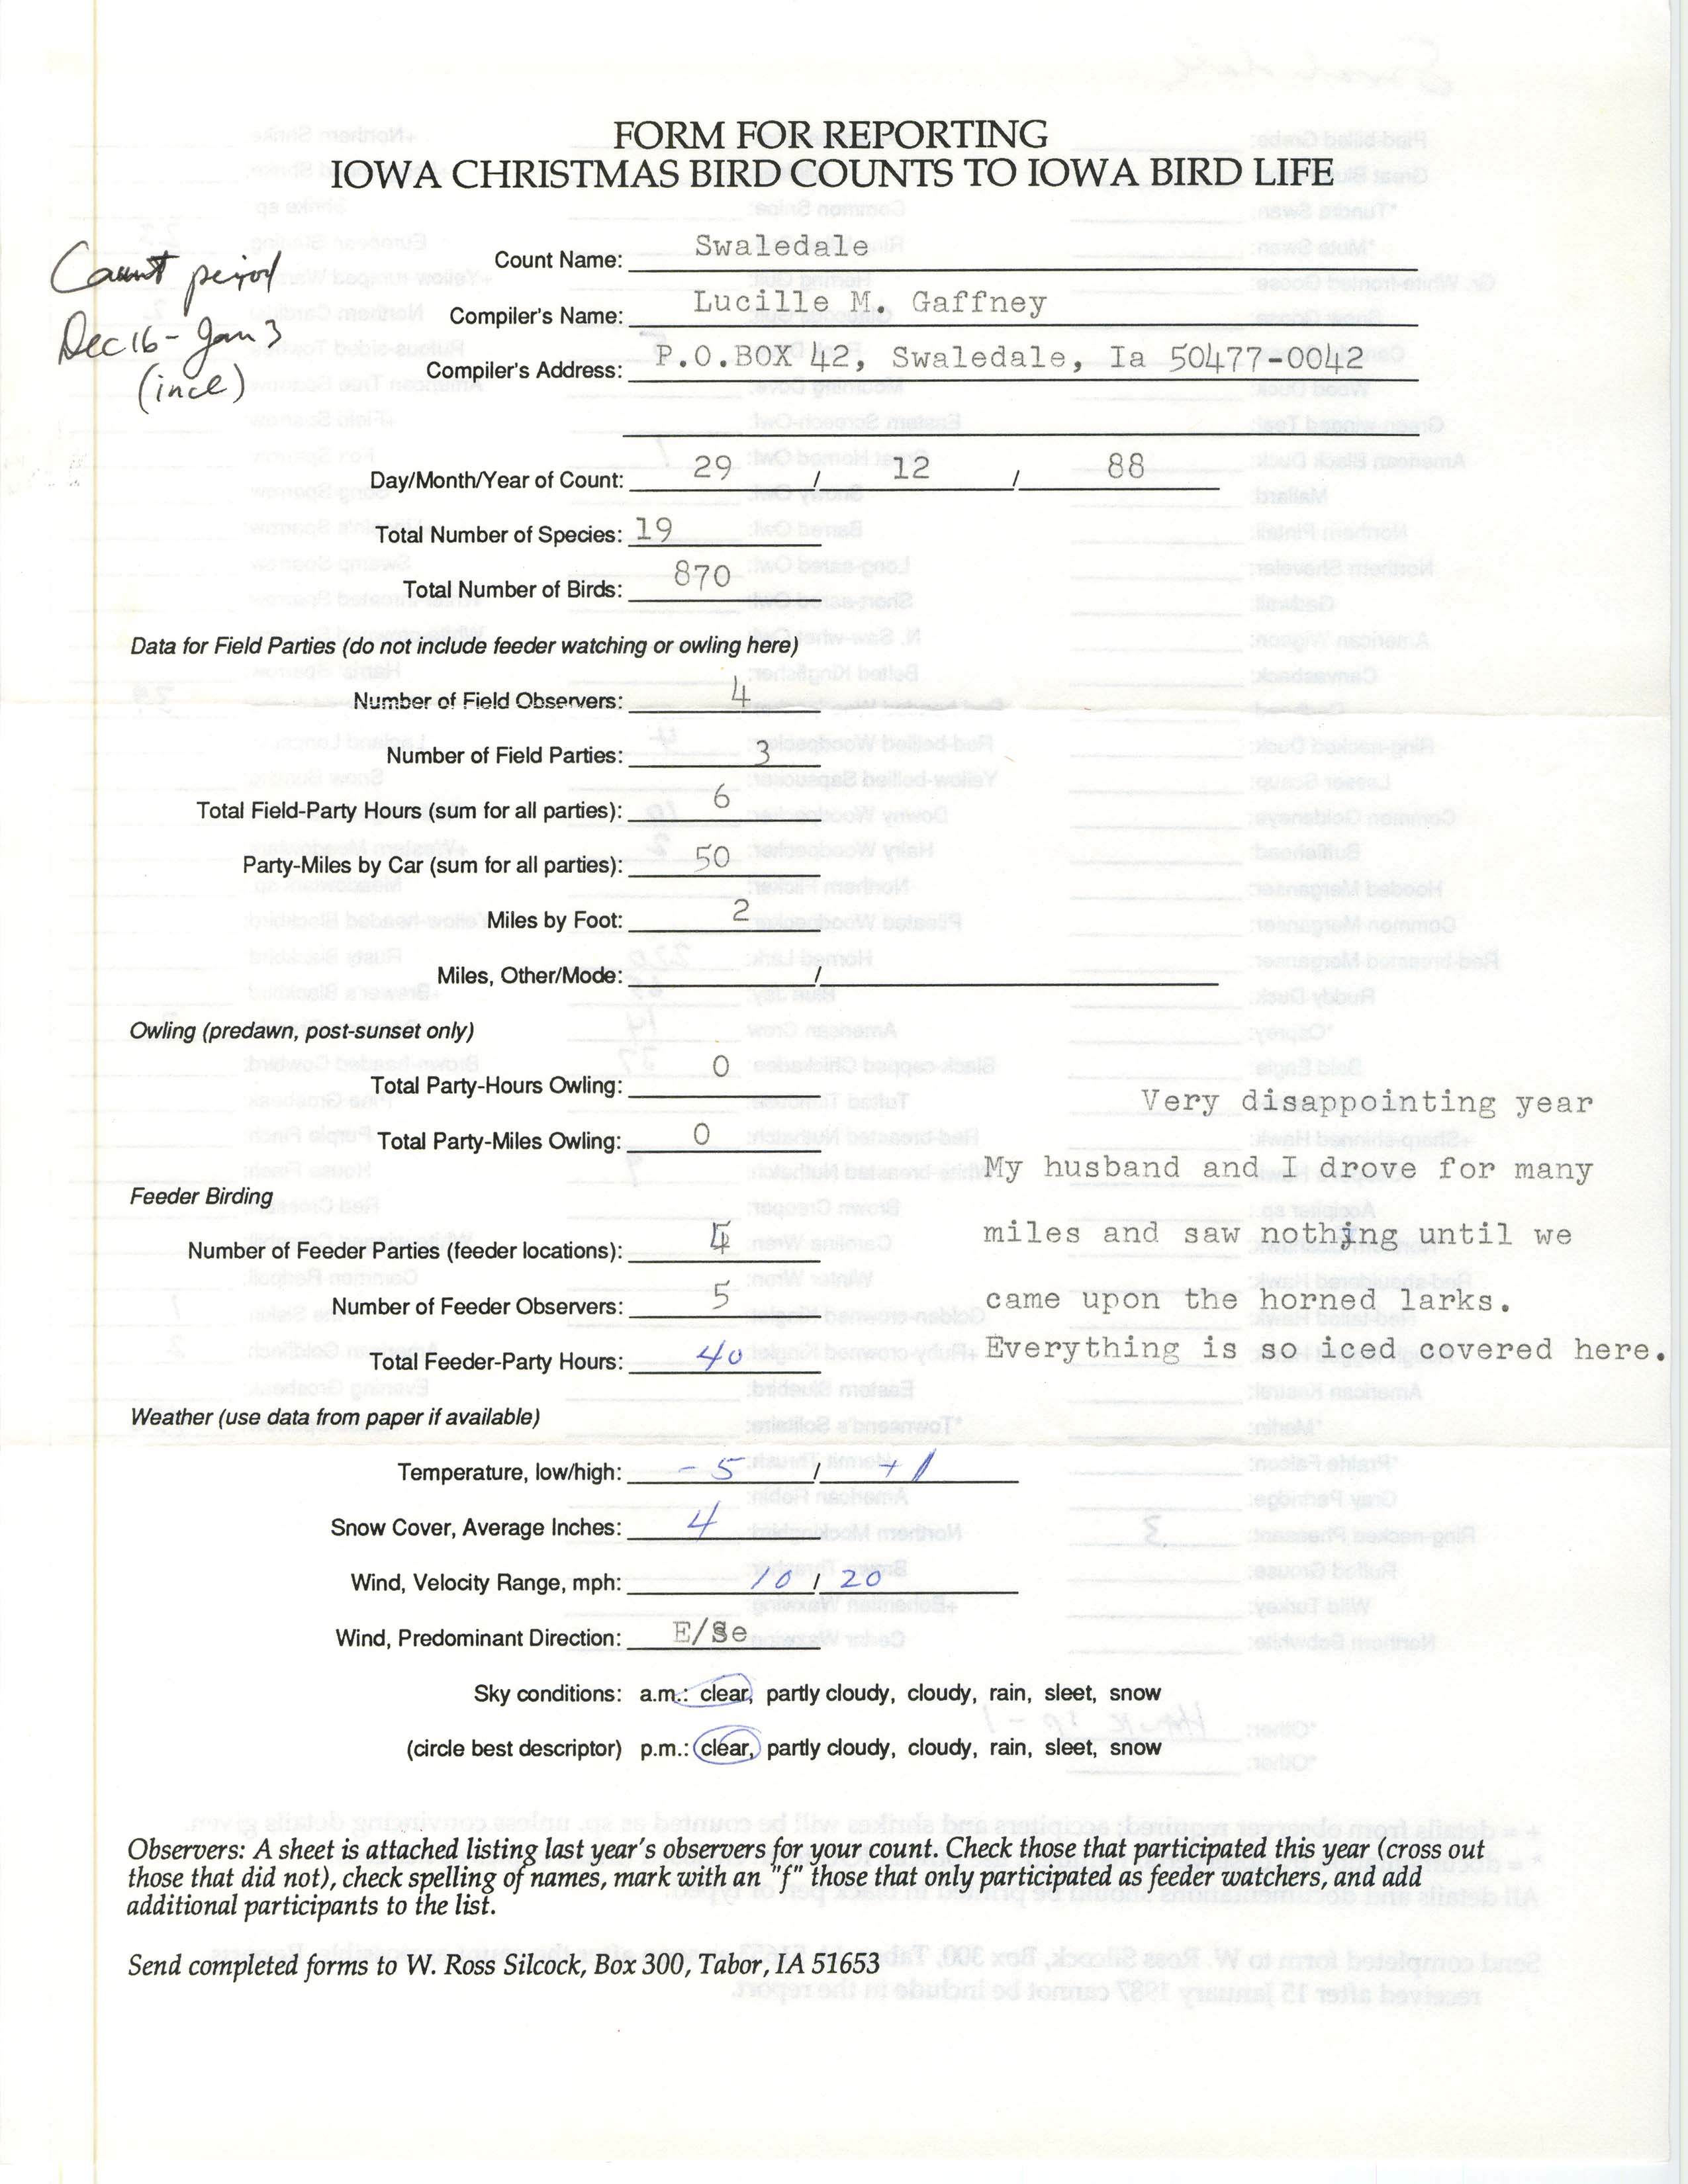 Form for reporting Iowa Christmas bird counts to Iowa Bird Life, Lucille M. Gaffney, December 29, 1988